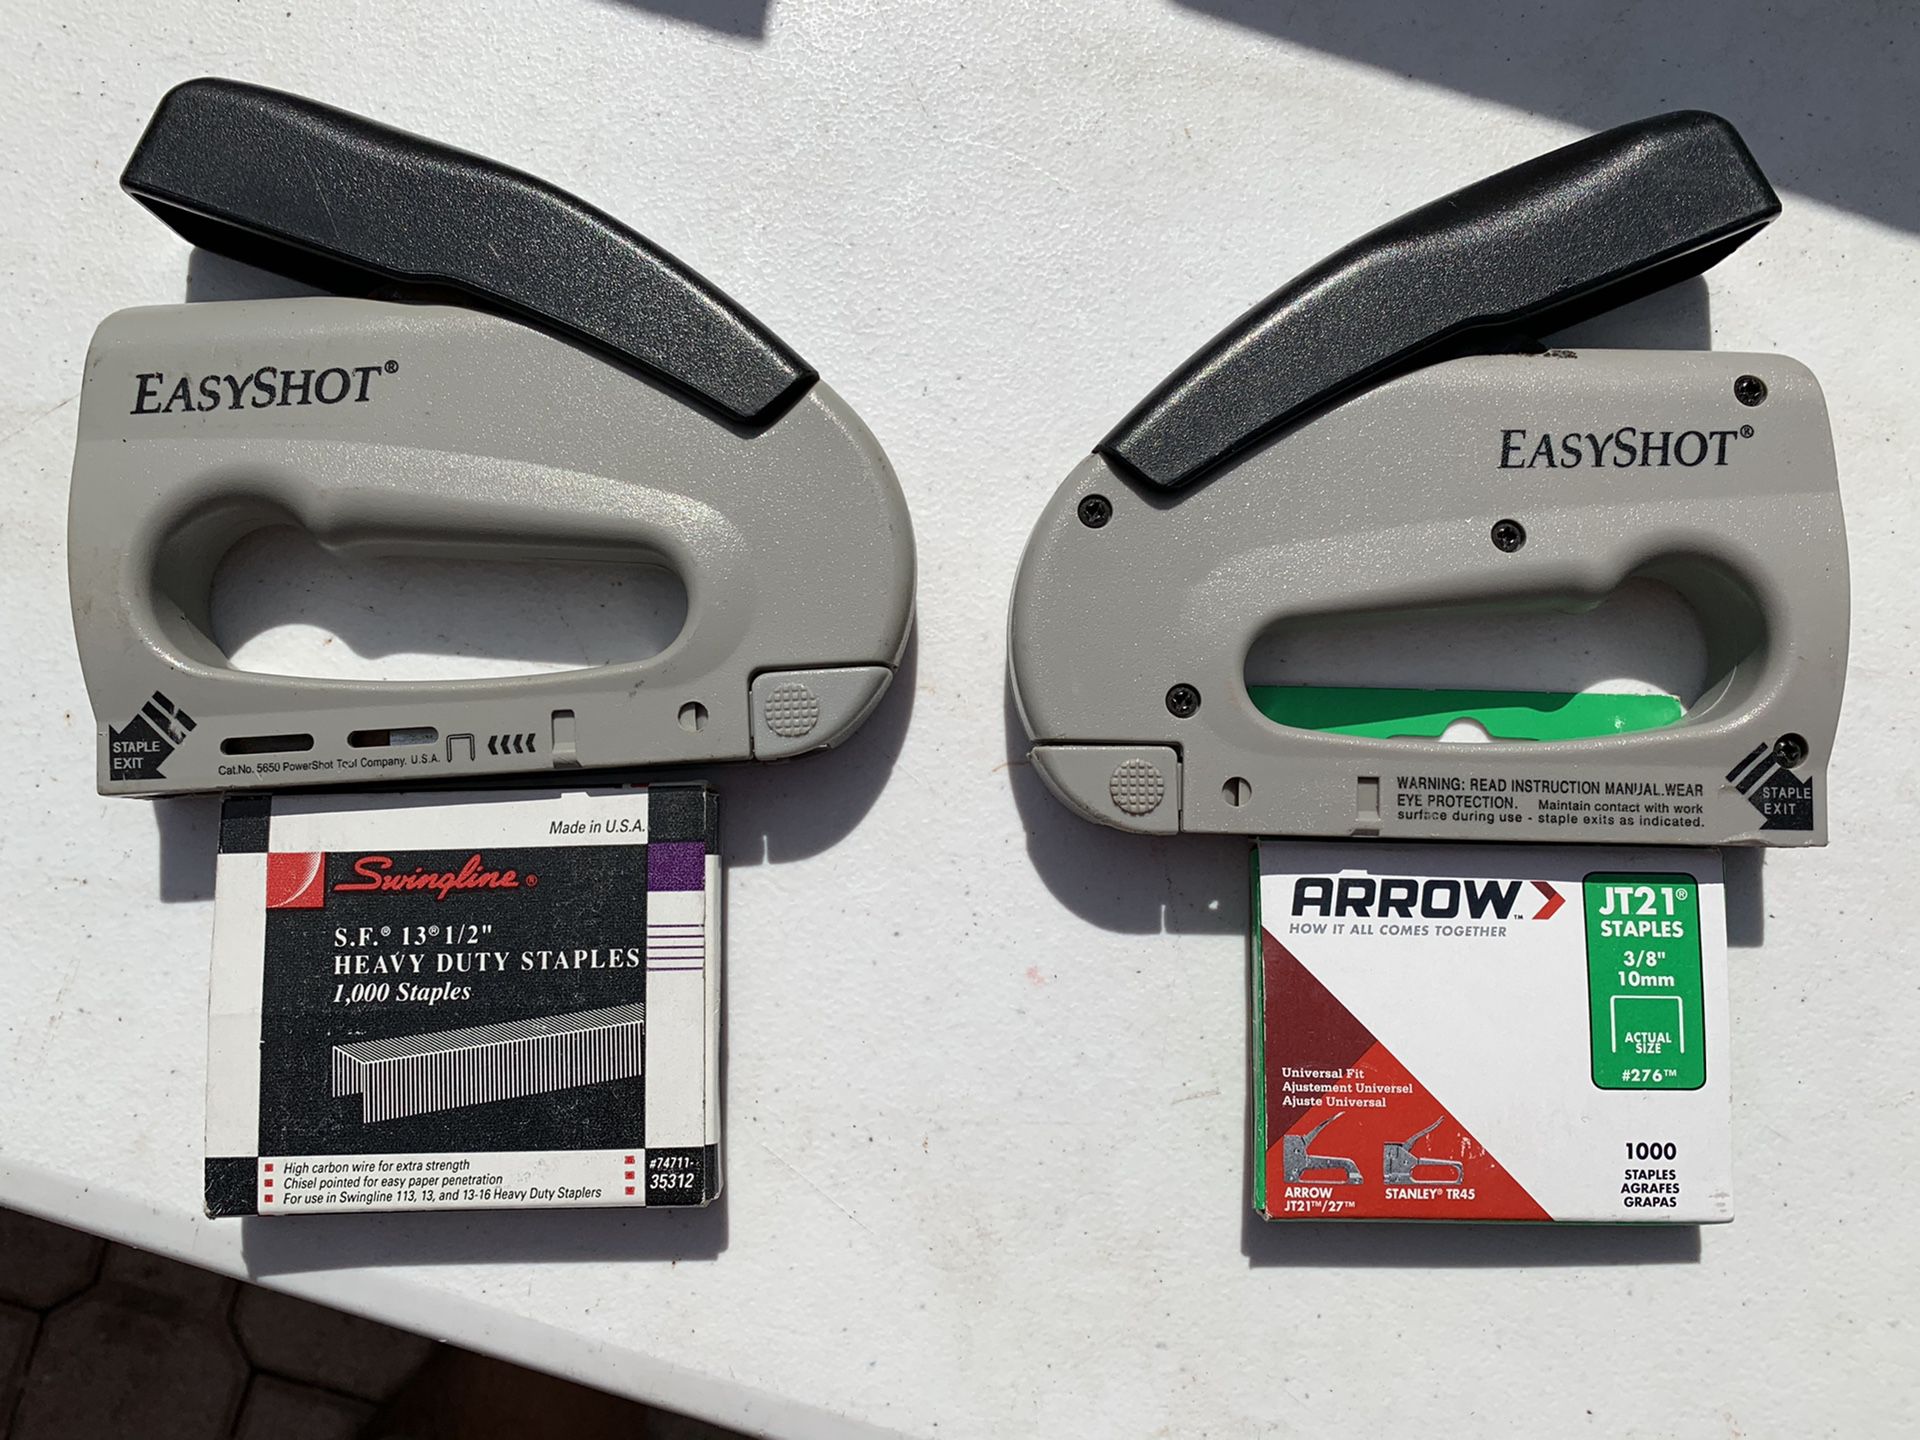 Easyshot staple gun with staples. $15.00 for both all you see in pic